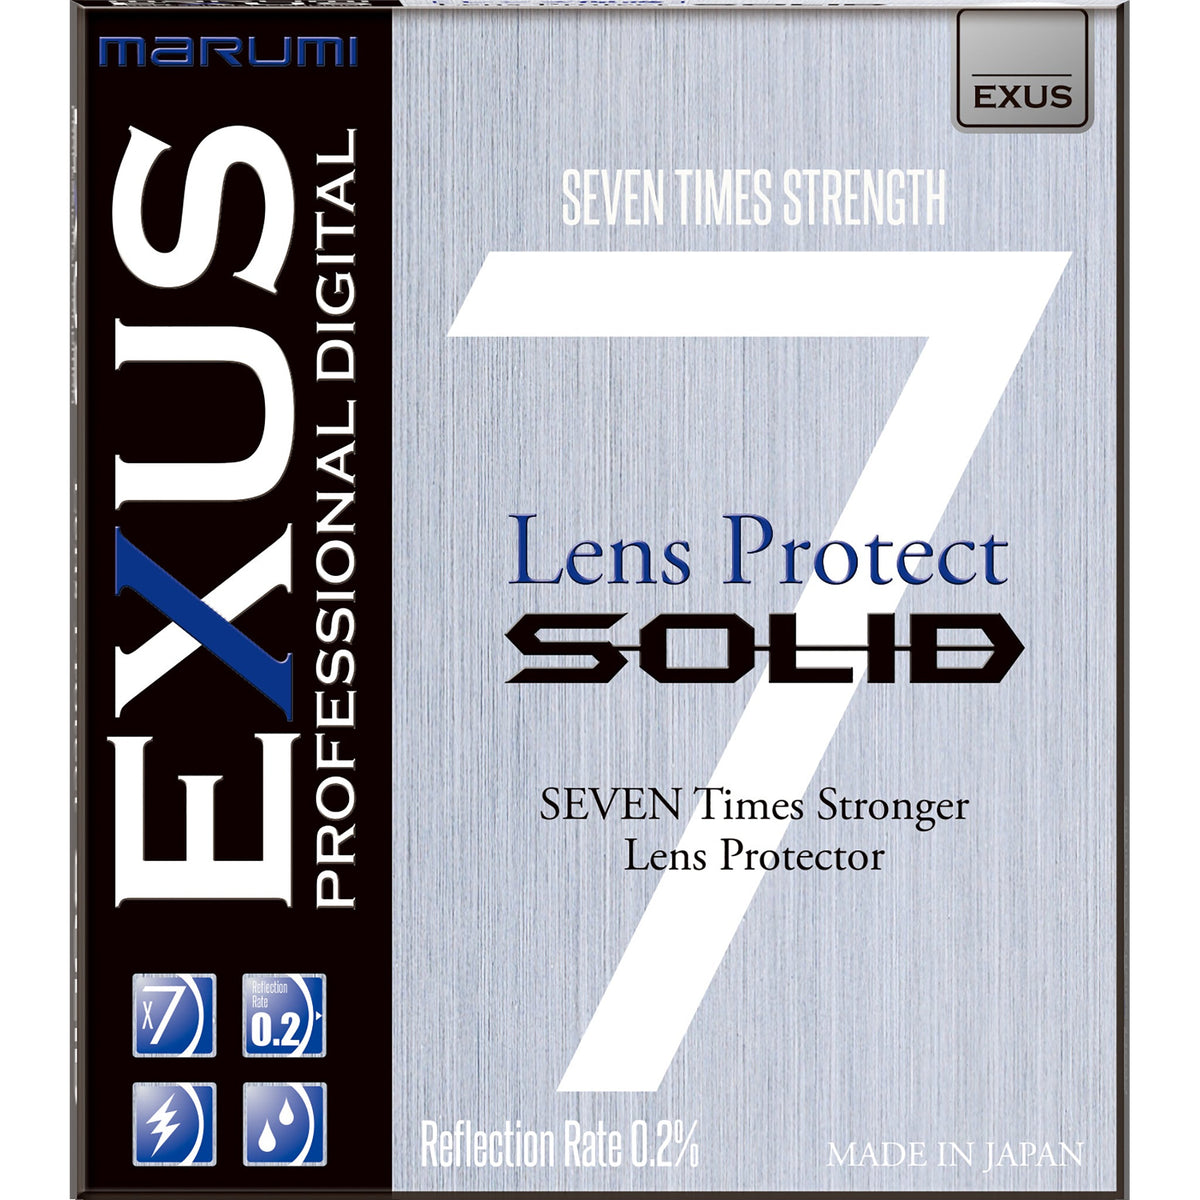 EXUS Lens Protect SOLID